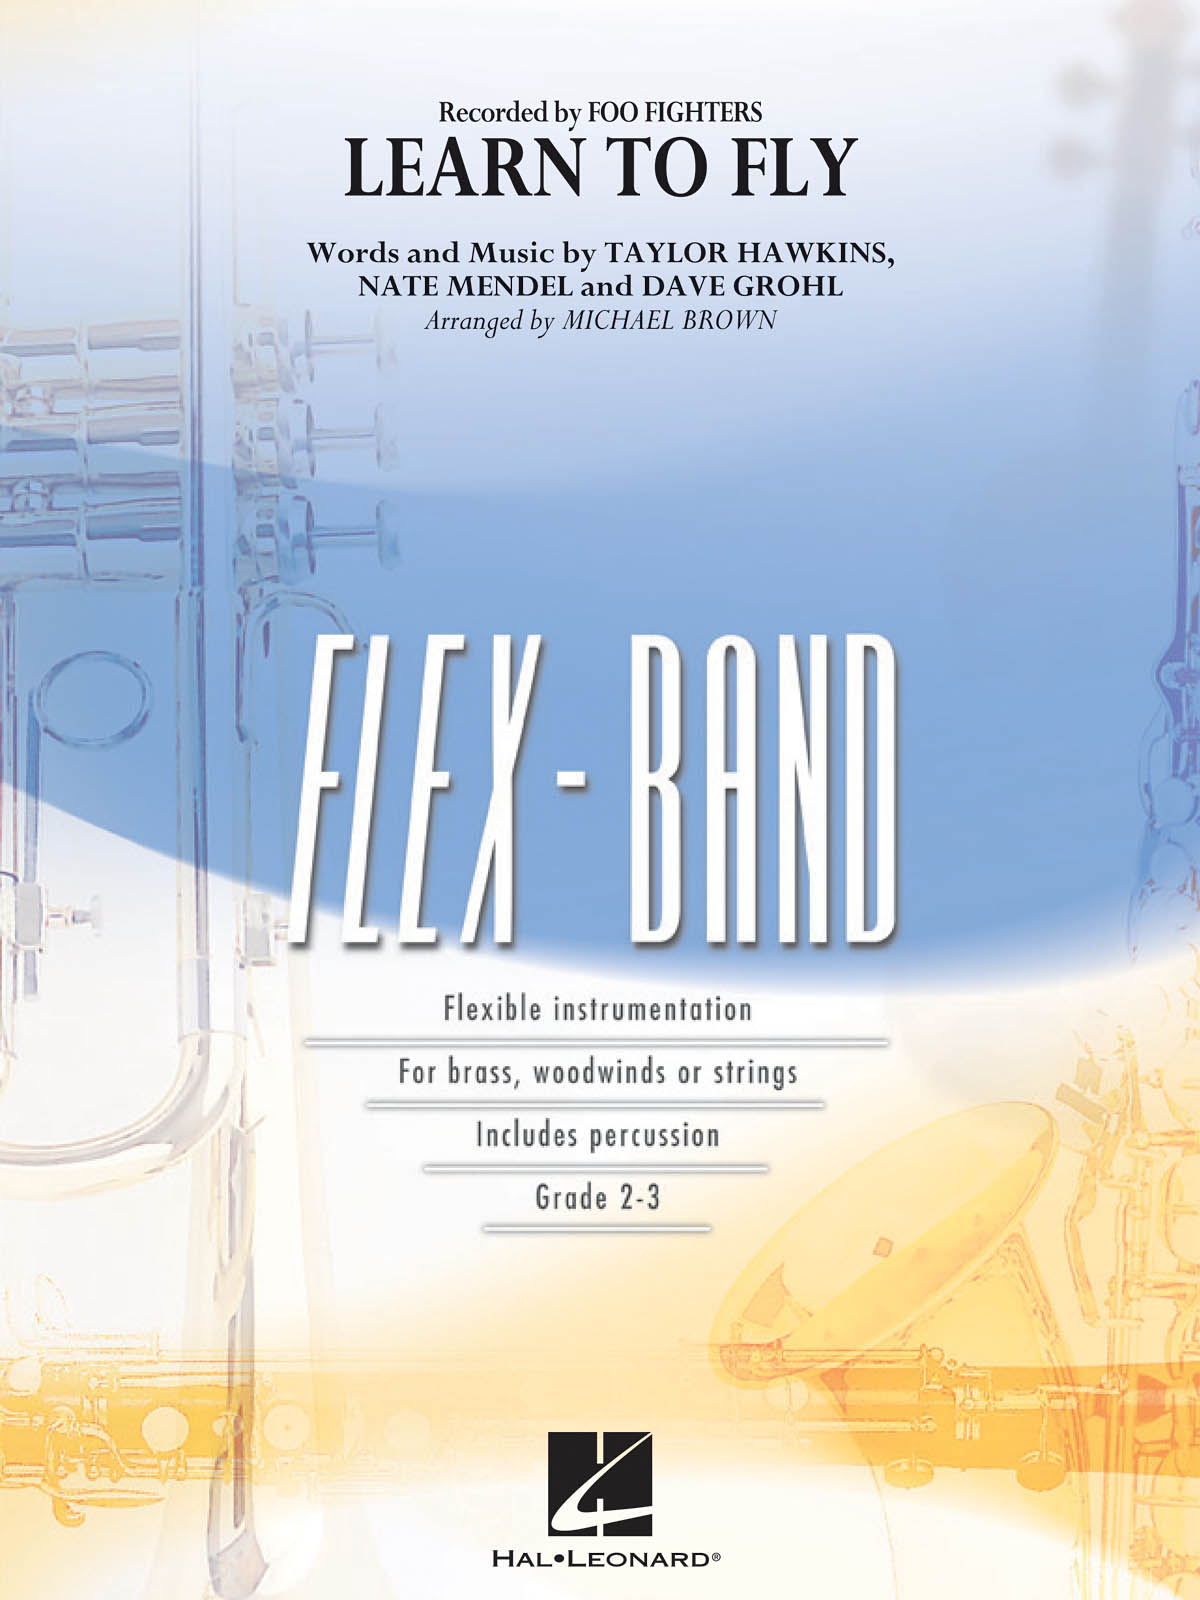 Taylor Hawkins Nate Mendel Dave Grohl: Learn to Fly: Concert Band: Score